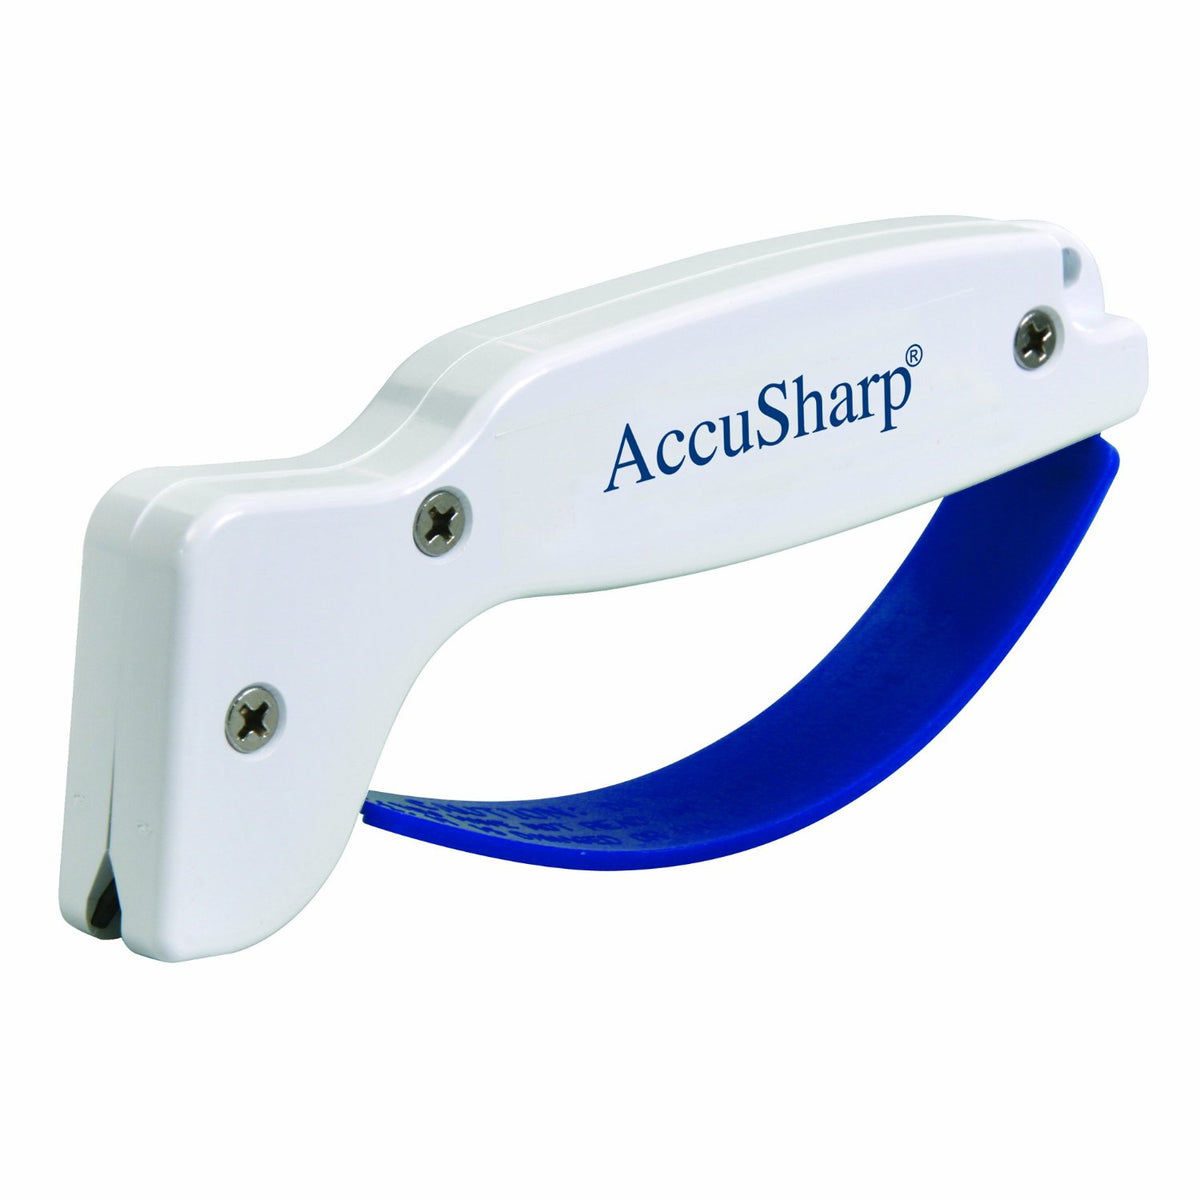 Buy accusharp 001 - Online store for kitchenware, knife sharpeners in USA, on sale, low price, discount deals, coupon code